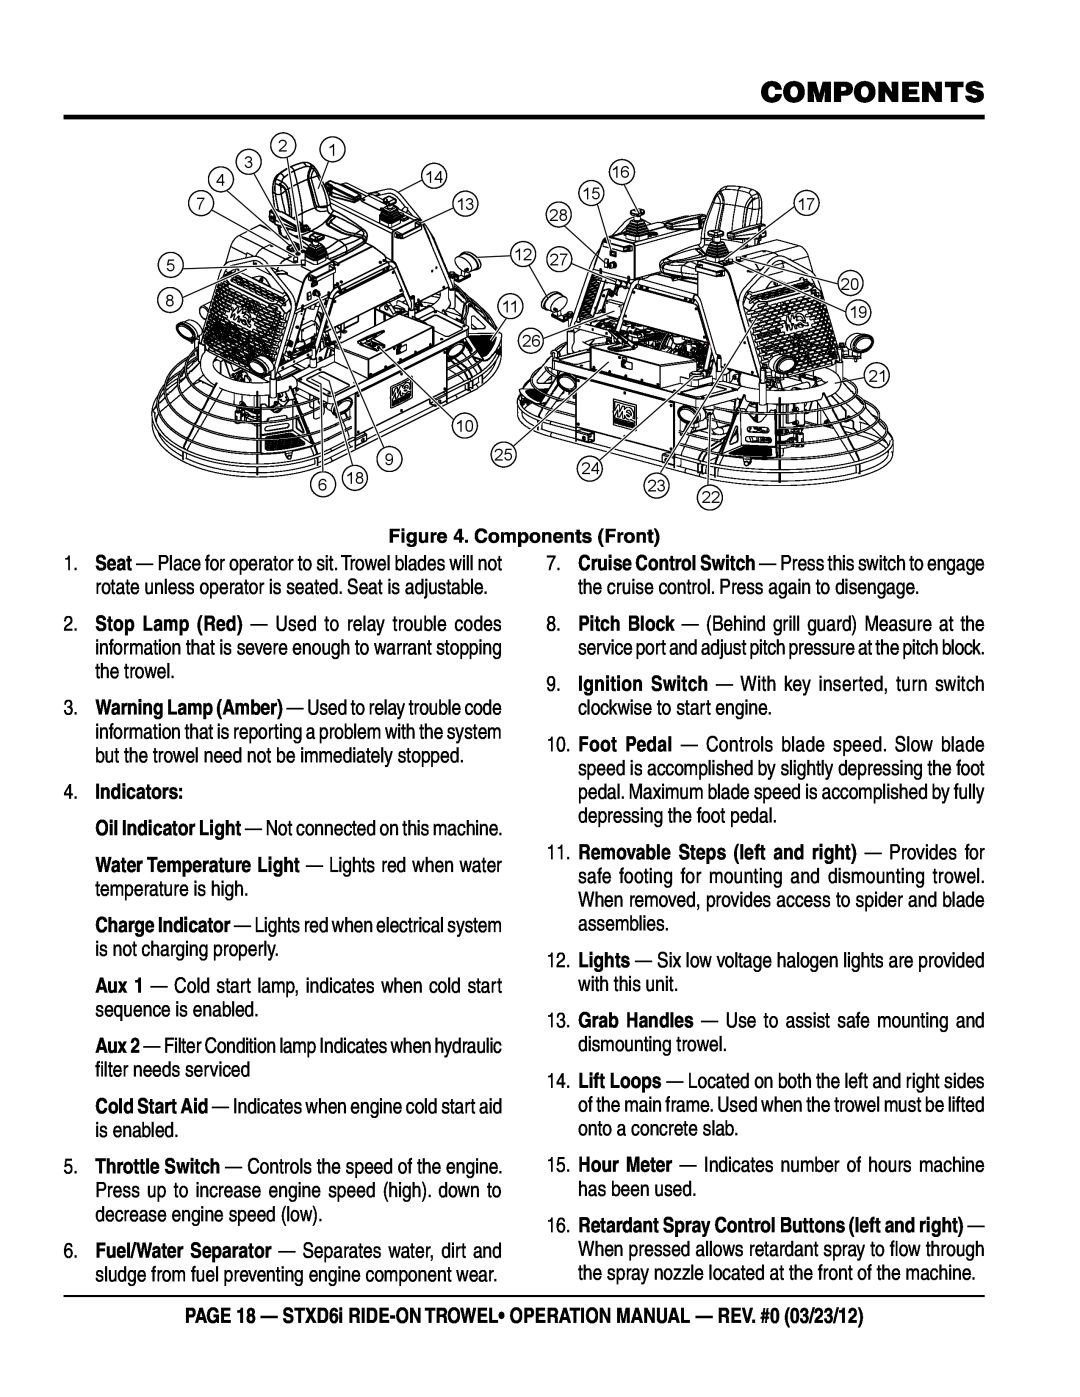 Multiquip STXD6i components, Indicators, page 18 - stxd6i RIDE-ON TROWEL operation manual - rev. #0 03/23/12 